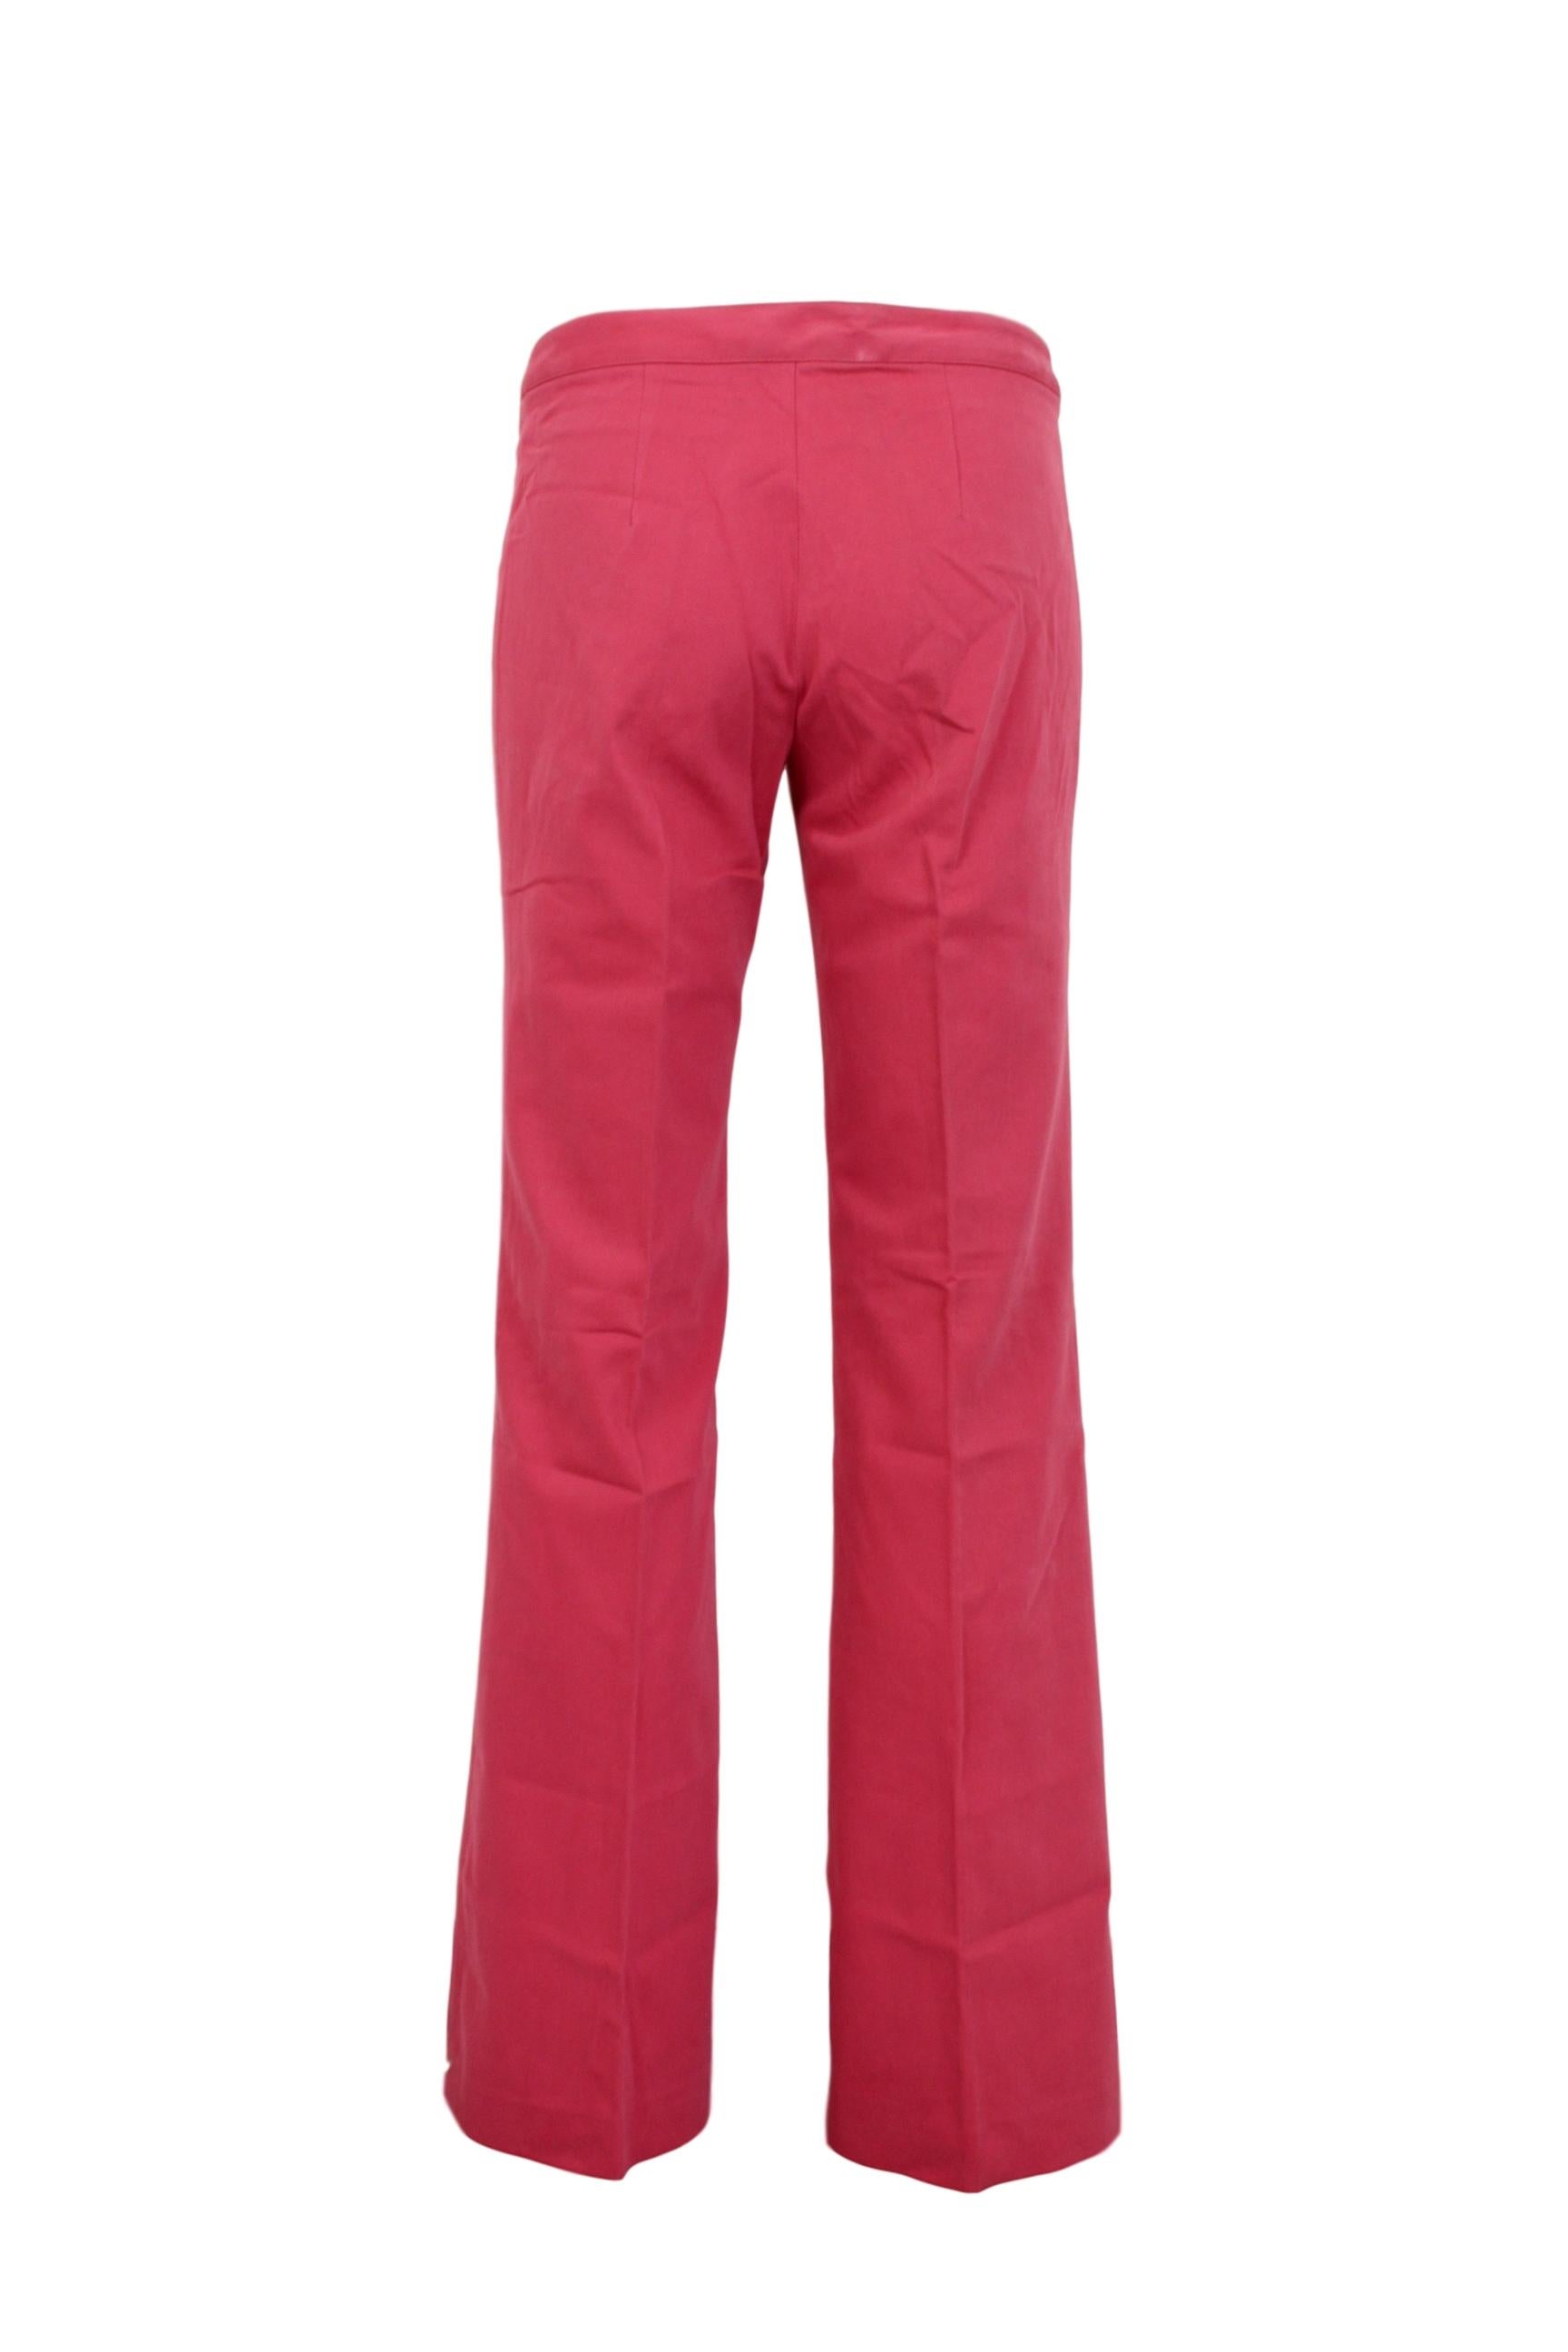 Fay 90s vintage women's trousers. Classic model, wide leg, flared. Pink color, 95% cotton 5% elastane. Closure with clip and zip. Carabiners on the hips. Made in Italy. New with tag, coming from stock.

Size: 46 It 12 Us 14 Uk

Waist: 40 cm

Length: